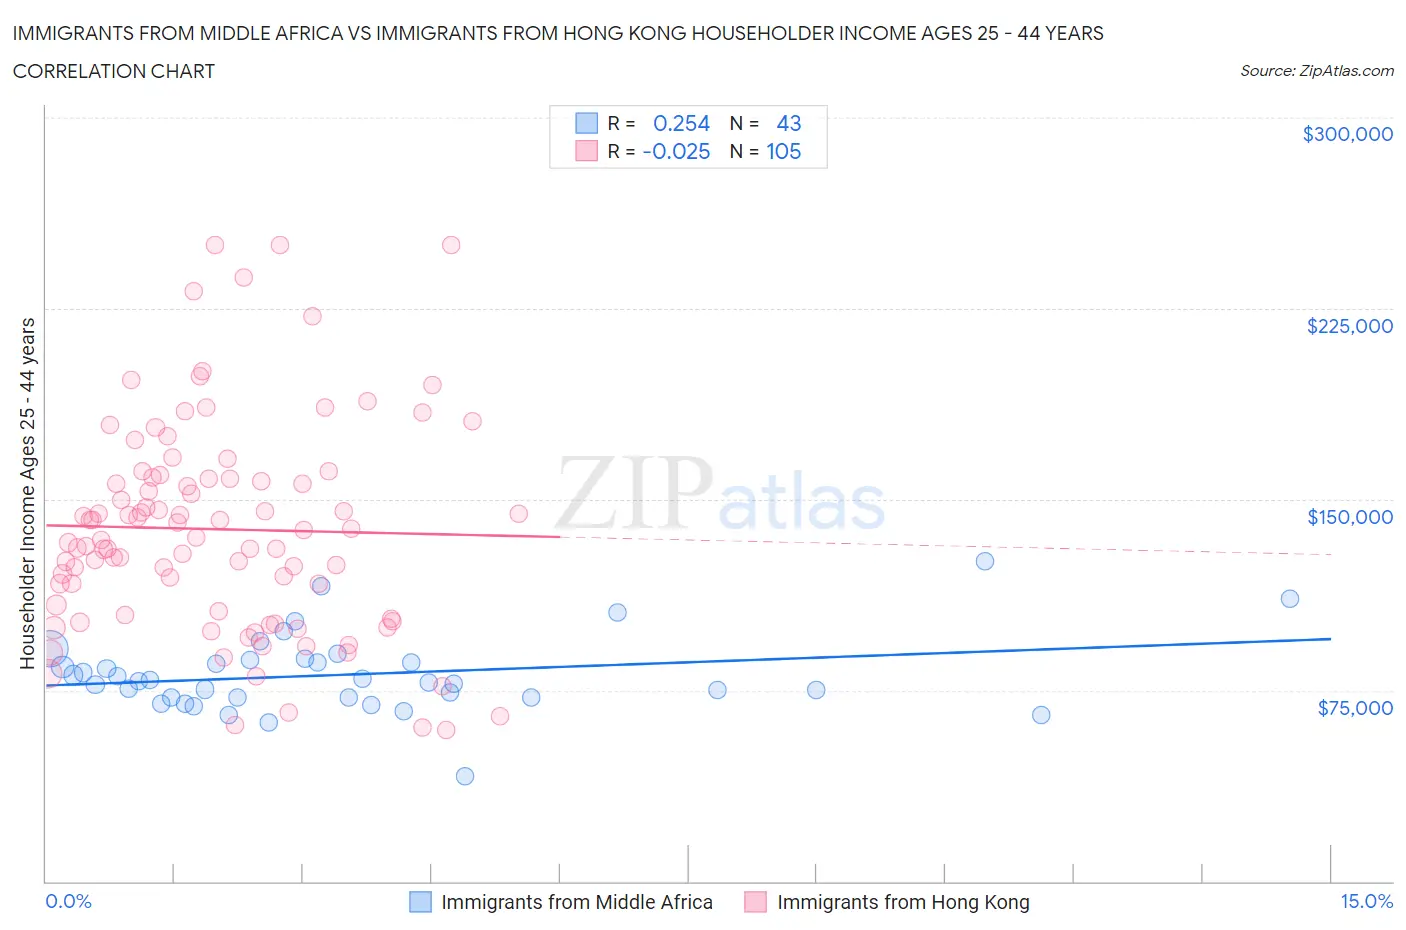 Immigrants from Middle Africa vs Immigrants from Hong Kong Householder Income Ages 25 - 44 years